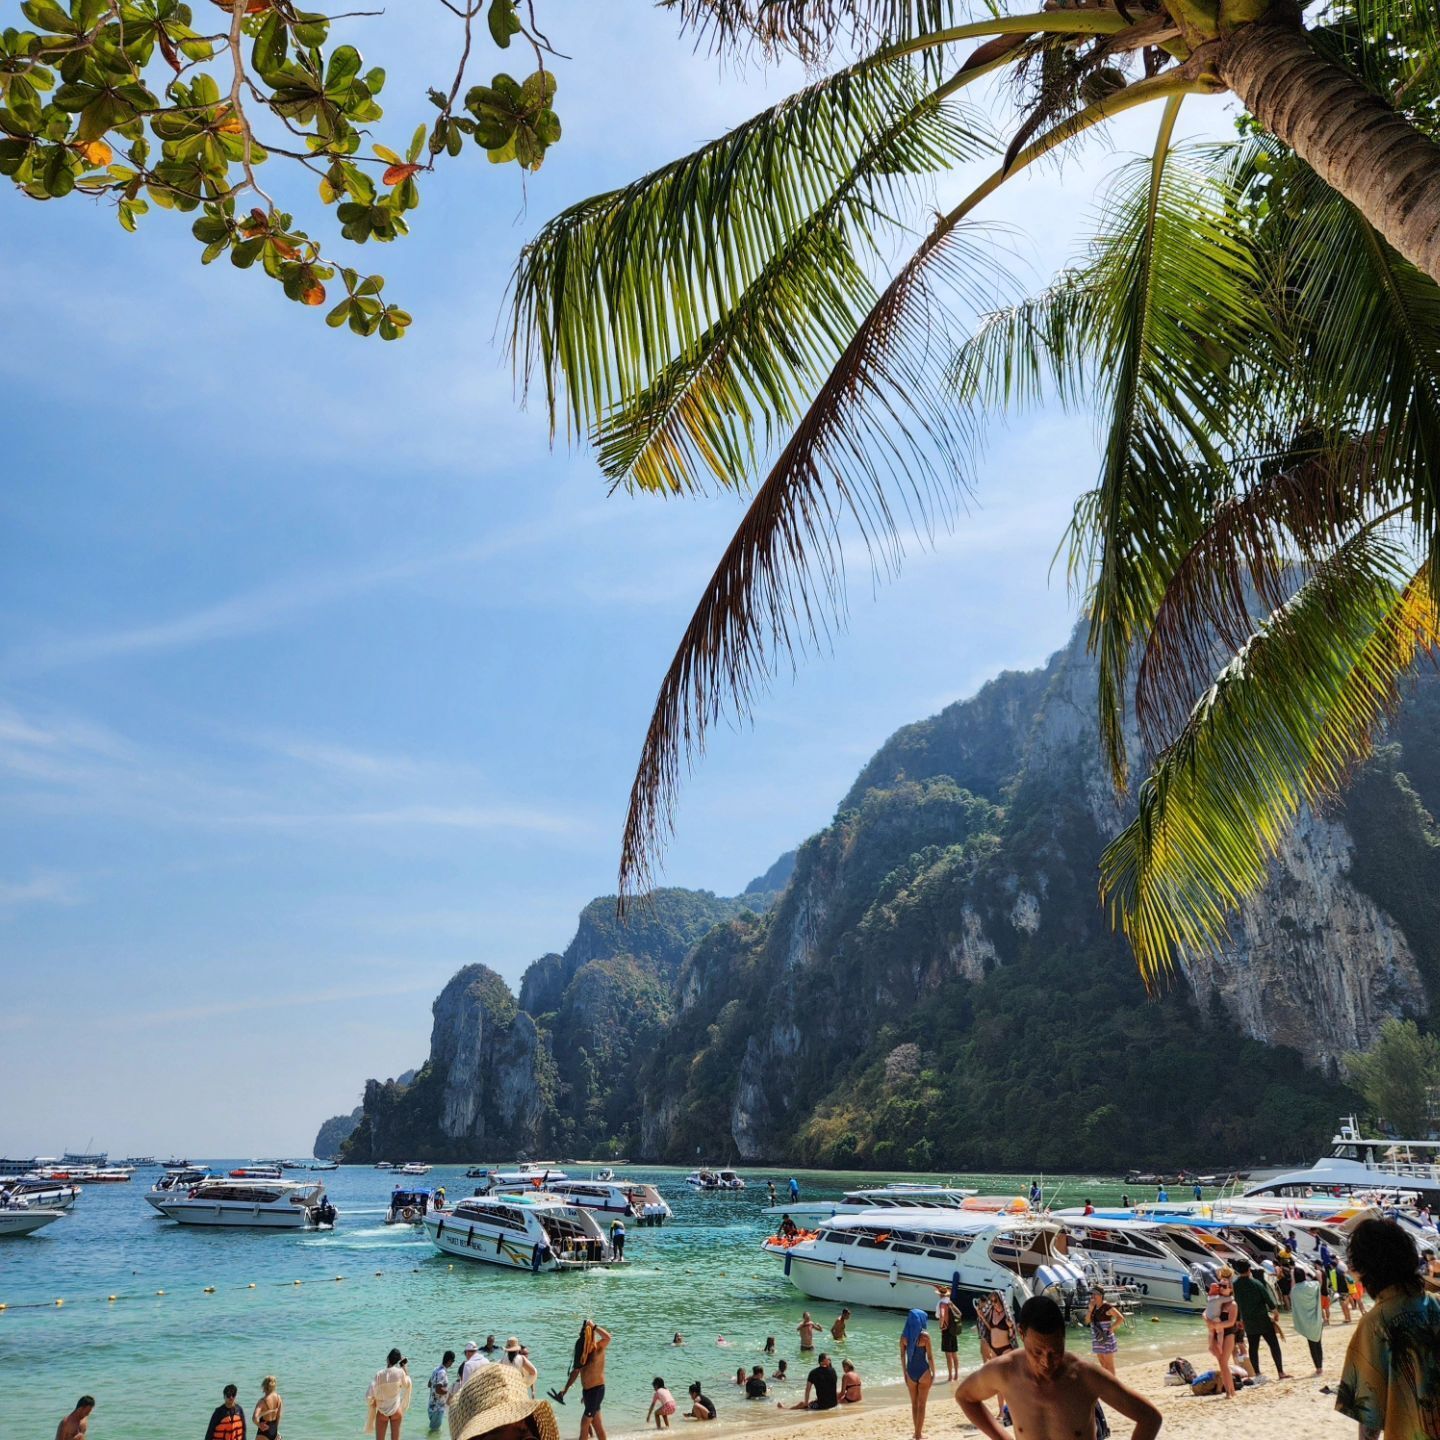 TOP 5 best beaches in the world and paradises according to Lonely Planet